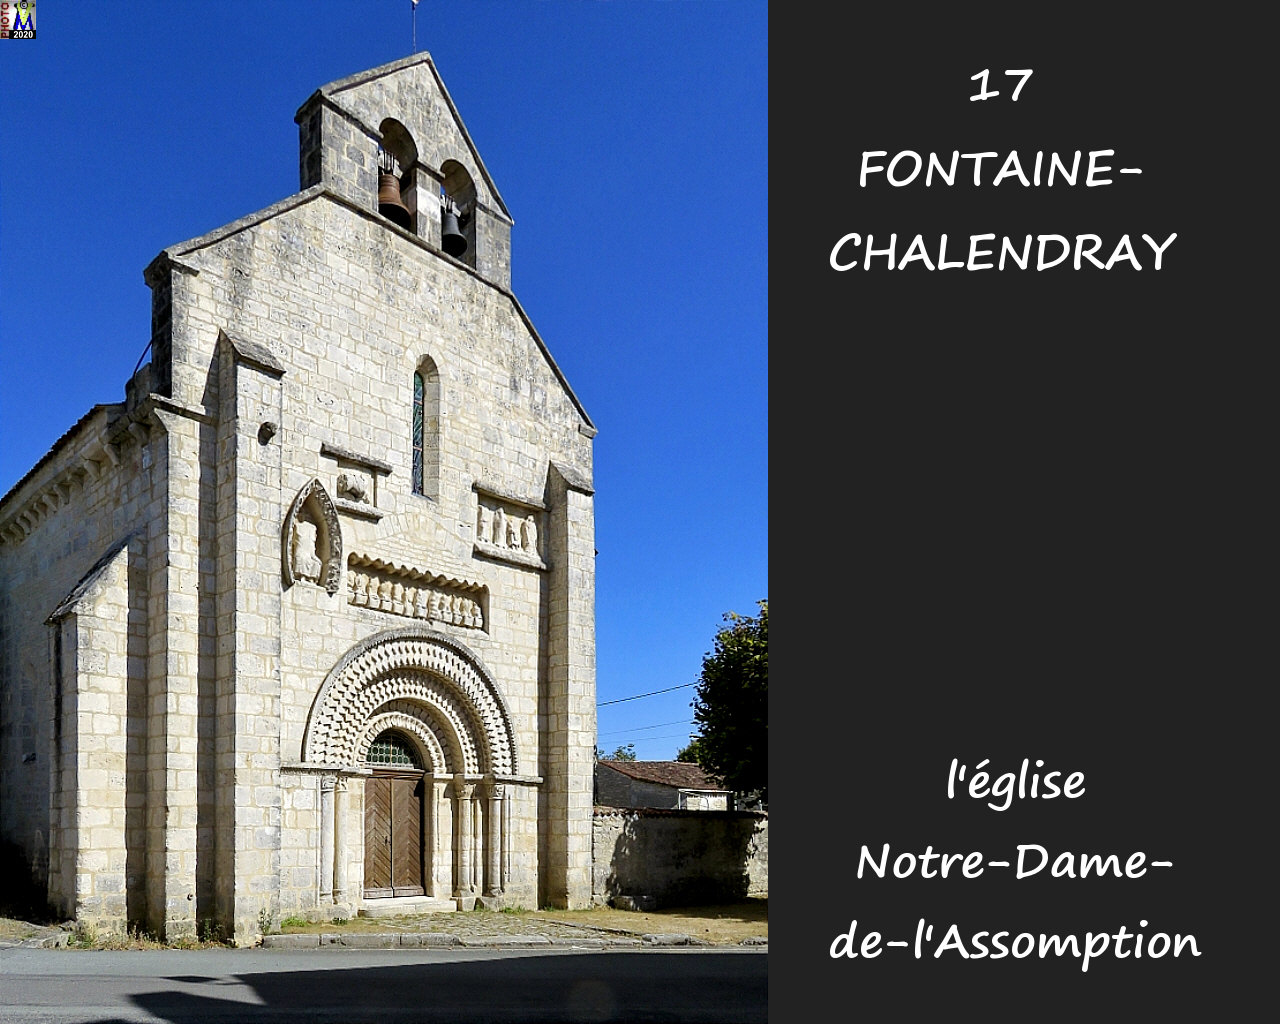 17FONTAINE-CHALENDRAY_eglise_1004.jpg